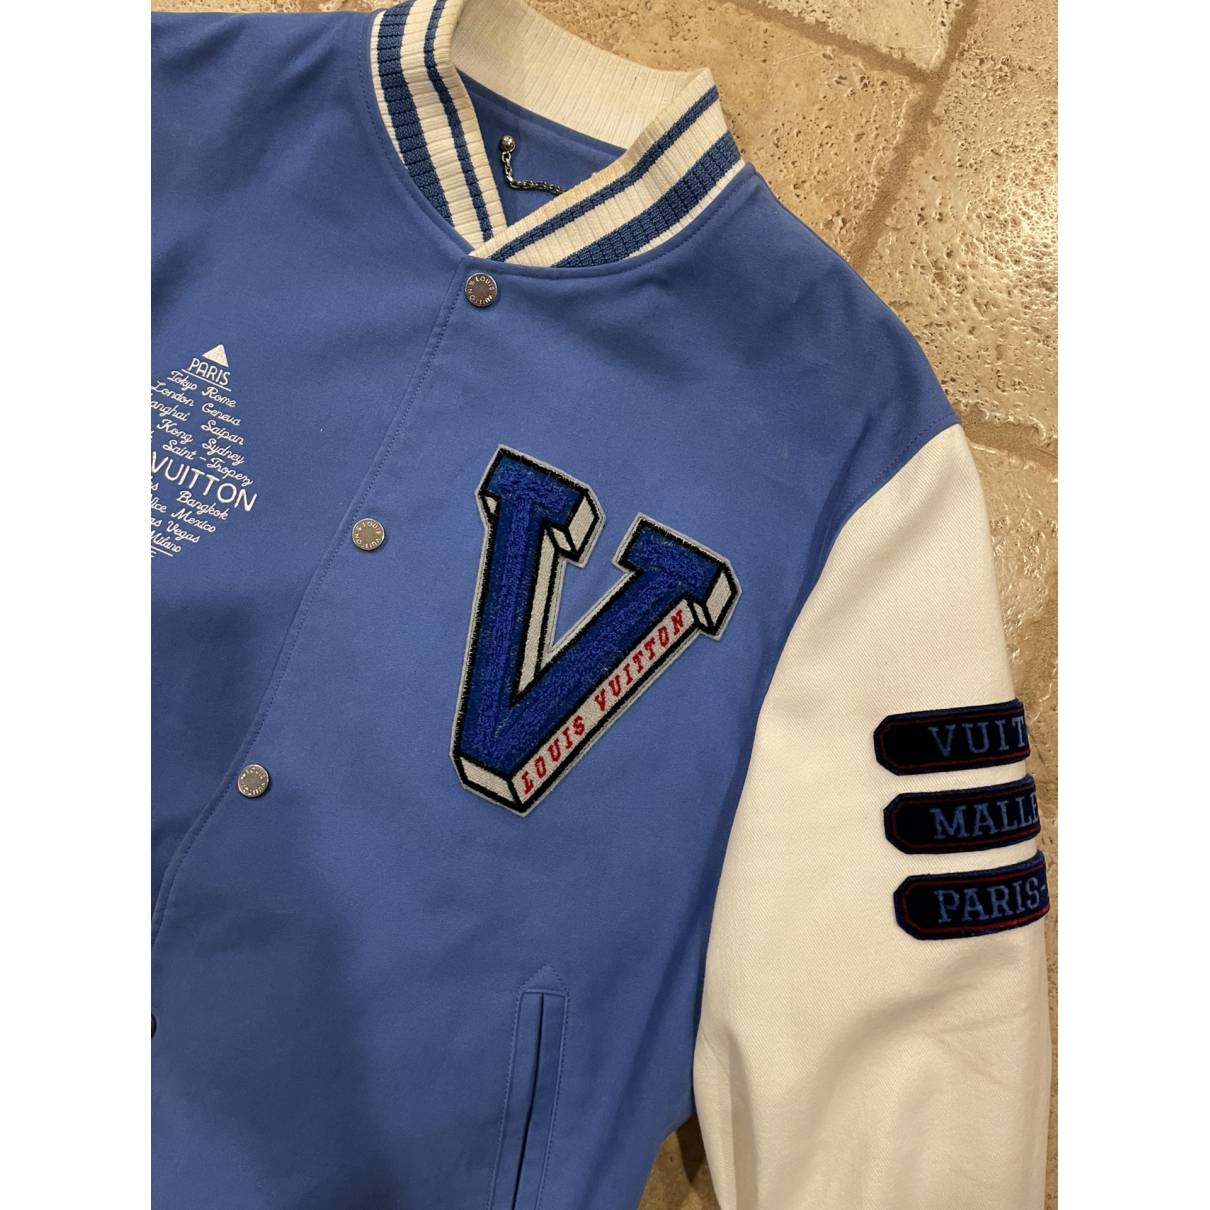 Louis Vuitton - Authenticated Jacket - Cotton Blue For Man, Very Good condition